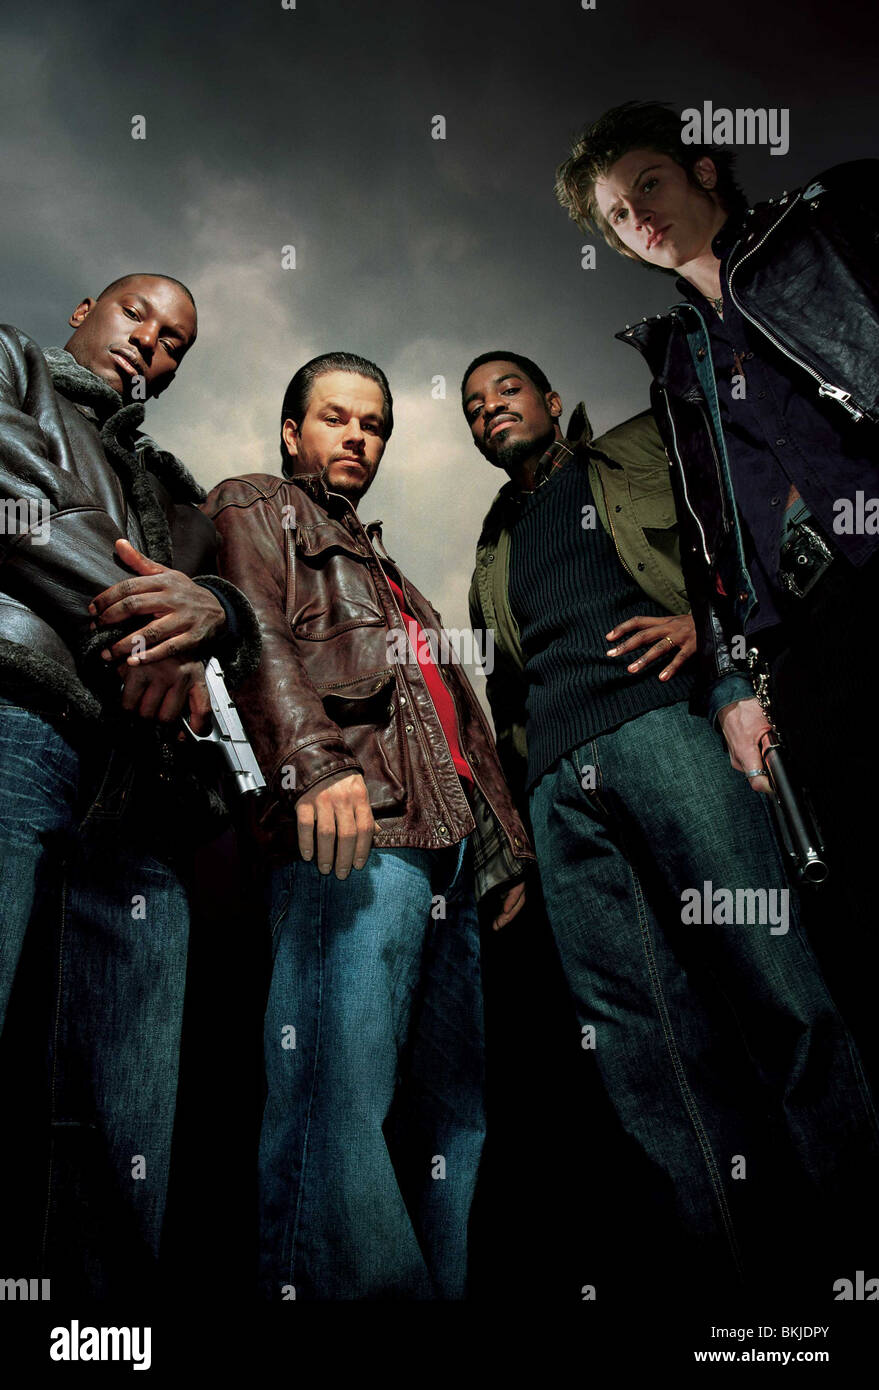 FOUR BROTHERS (2005) TYRESE GIBSON, MARK WAHLBERG, ANDRE BENJAMIN, GARRETT HEDLUND FBRO 002-017 Stock Photo